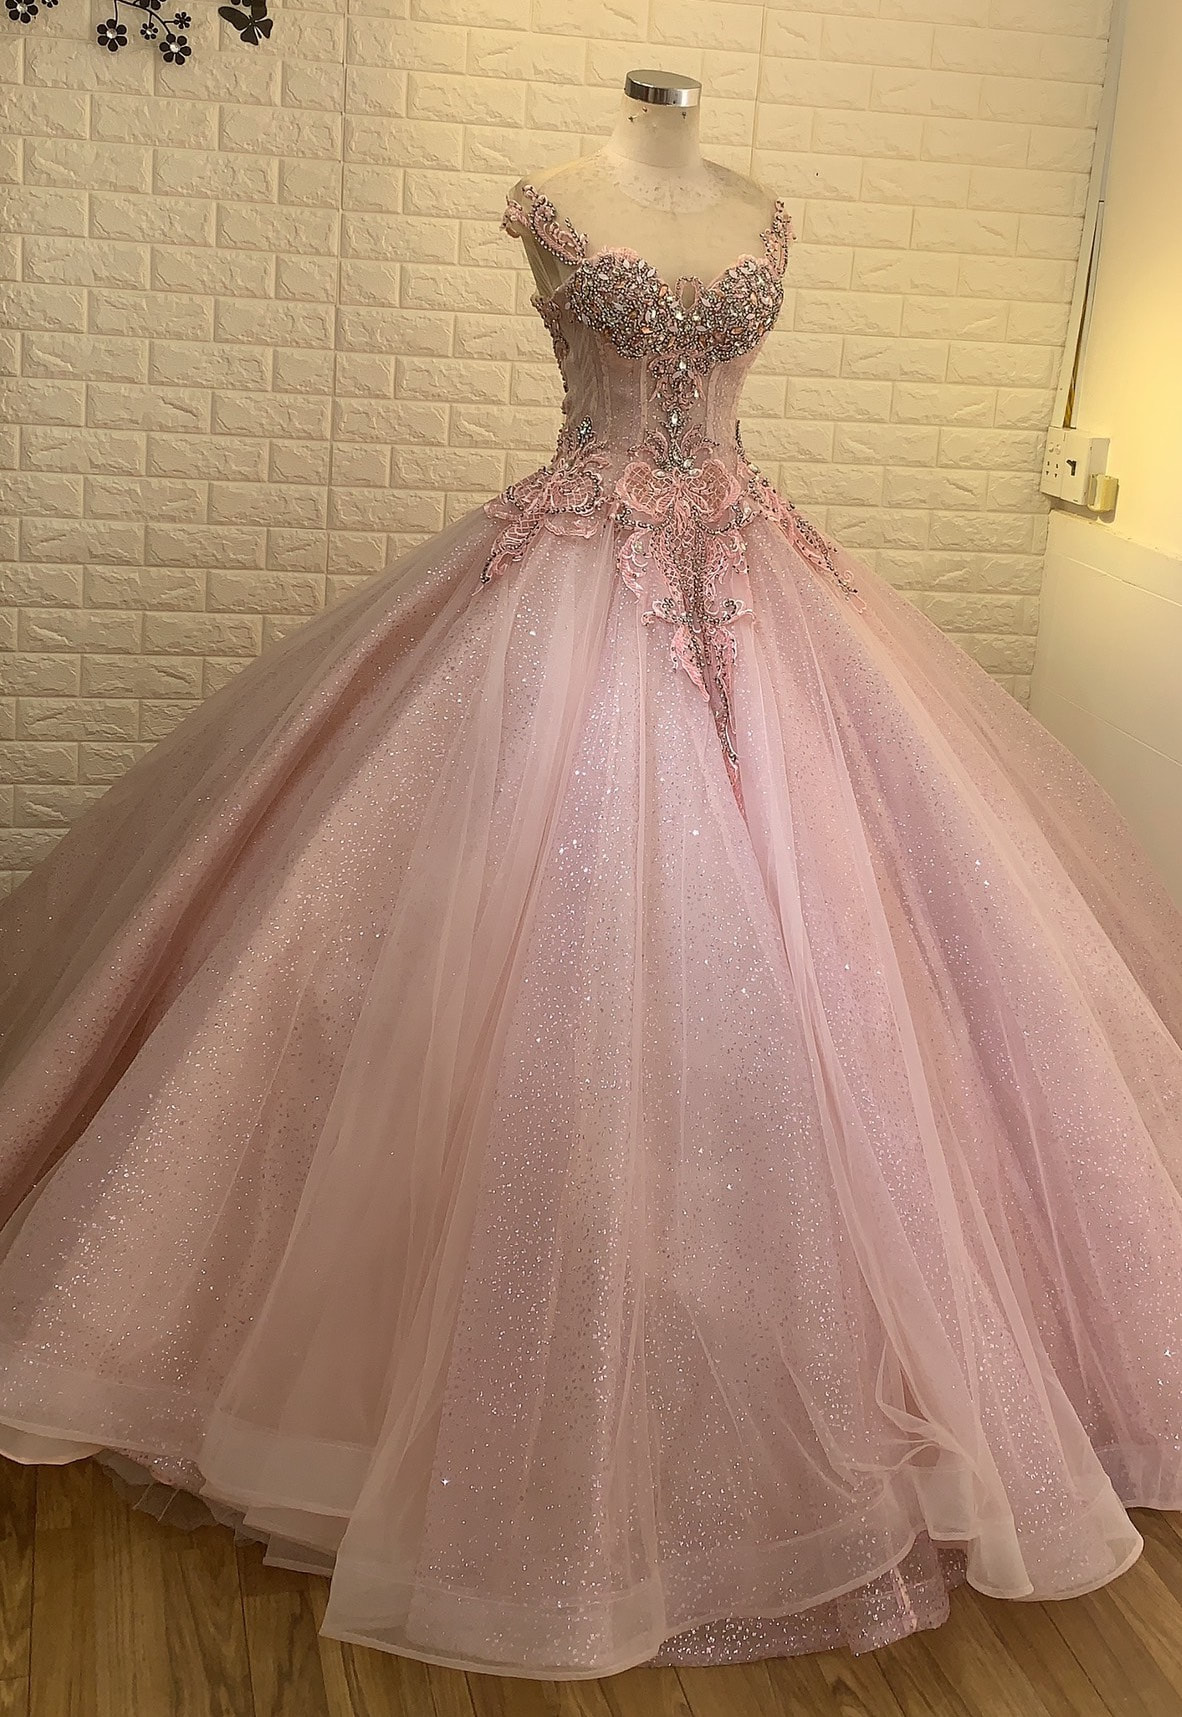 Candy sweet pink sparkle short or cap sleeves ball gown wedding/prom ...